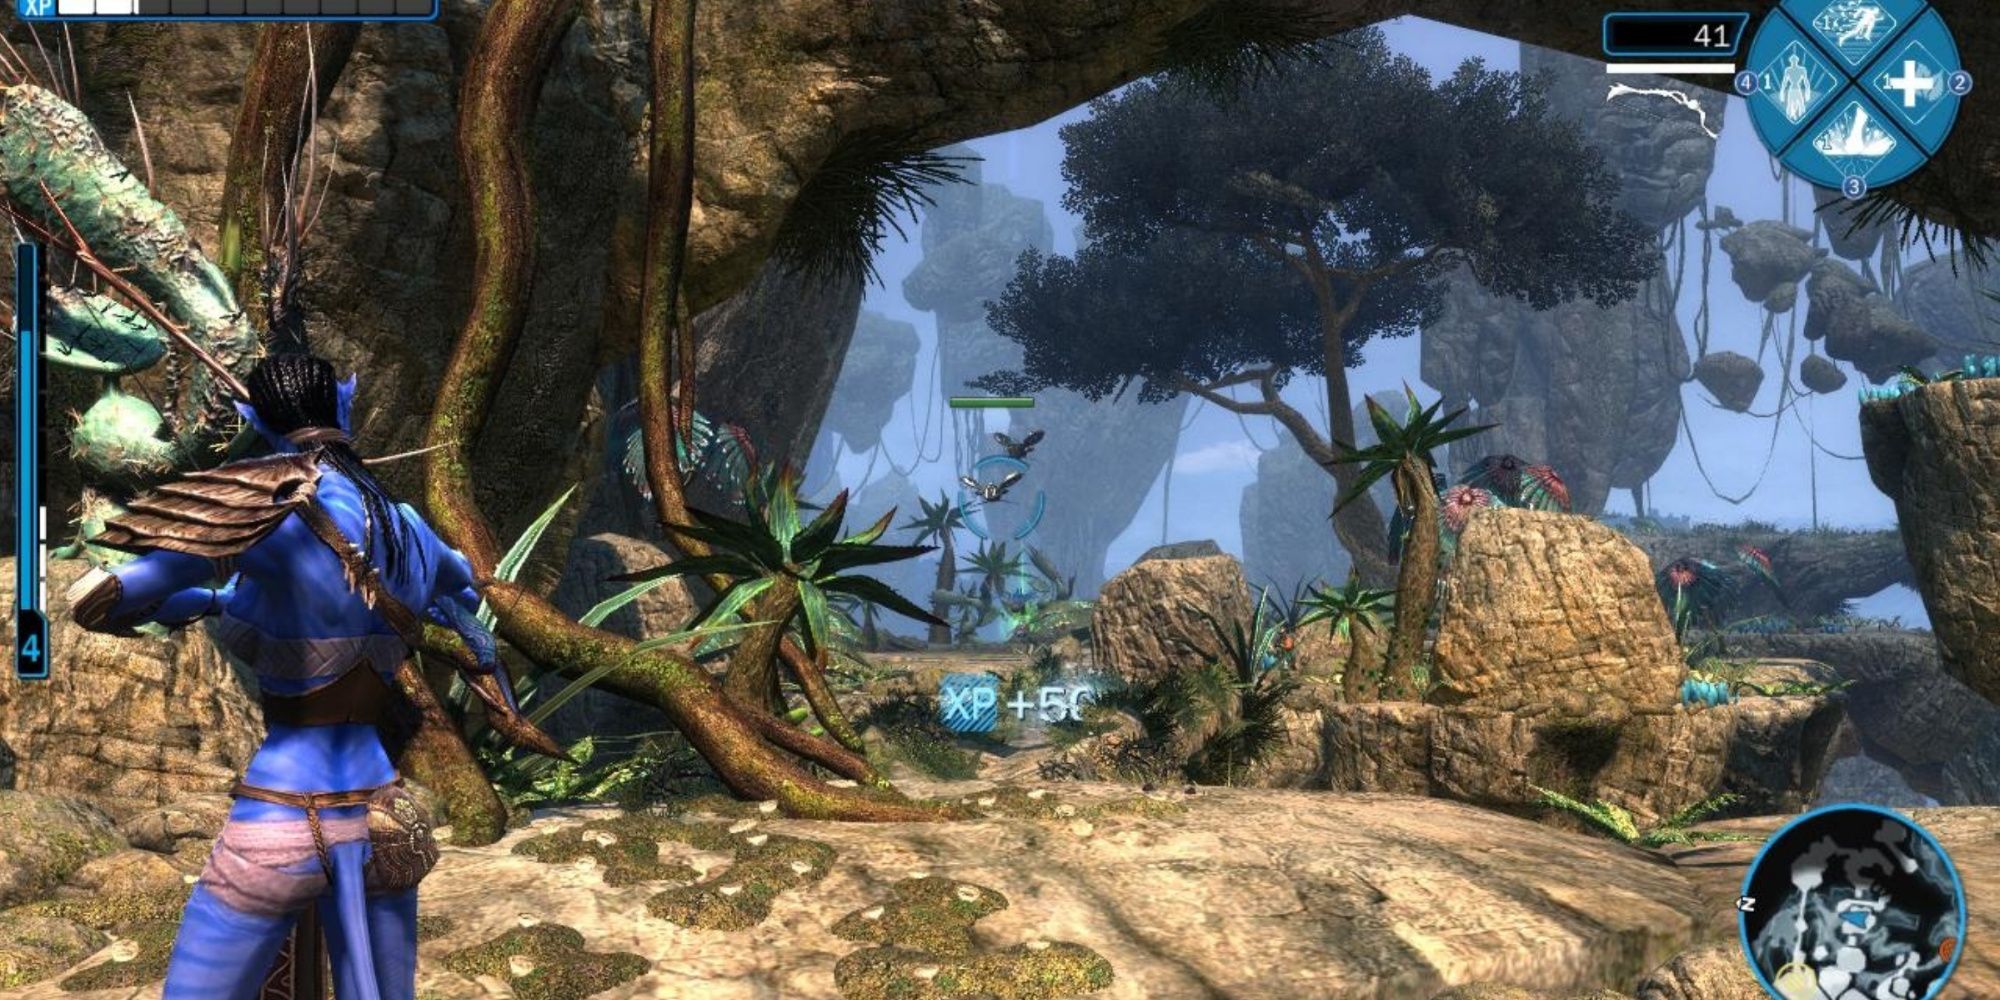 Fight your enemies in James Cameron's Avatar: The Game